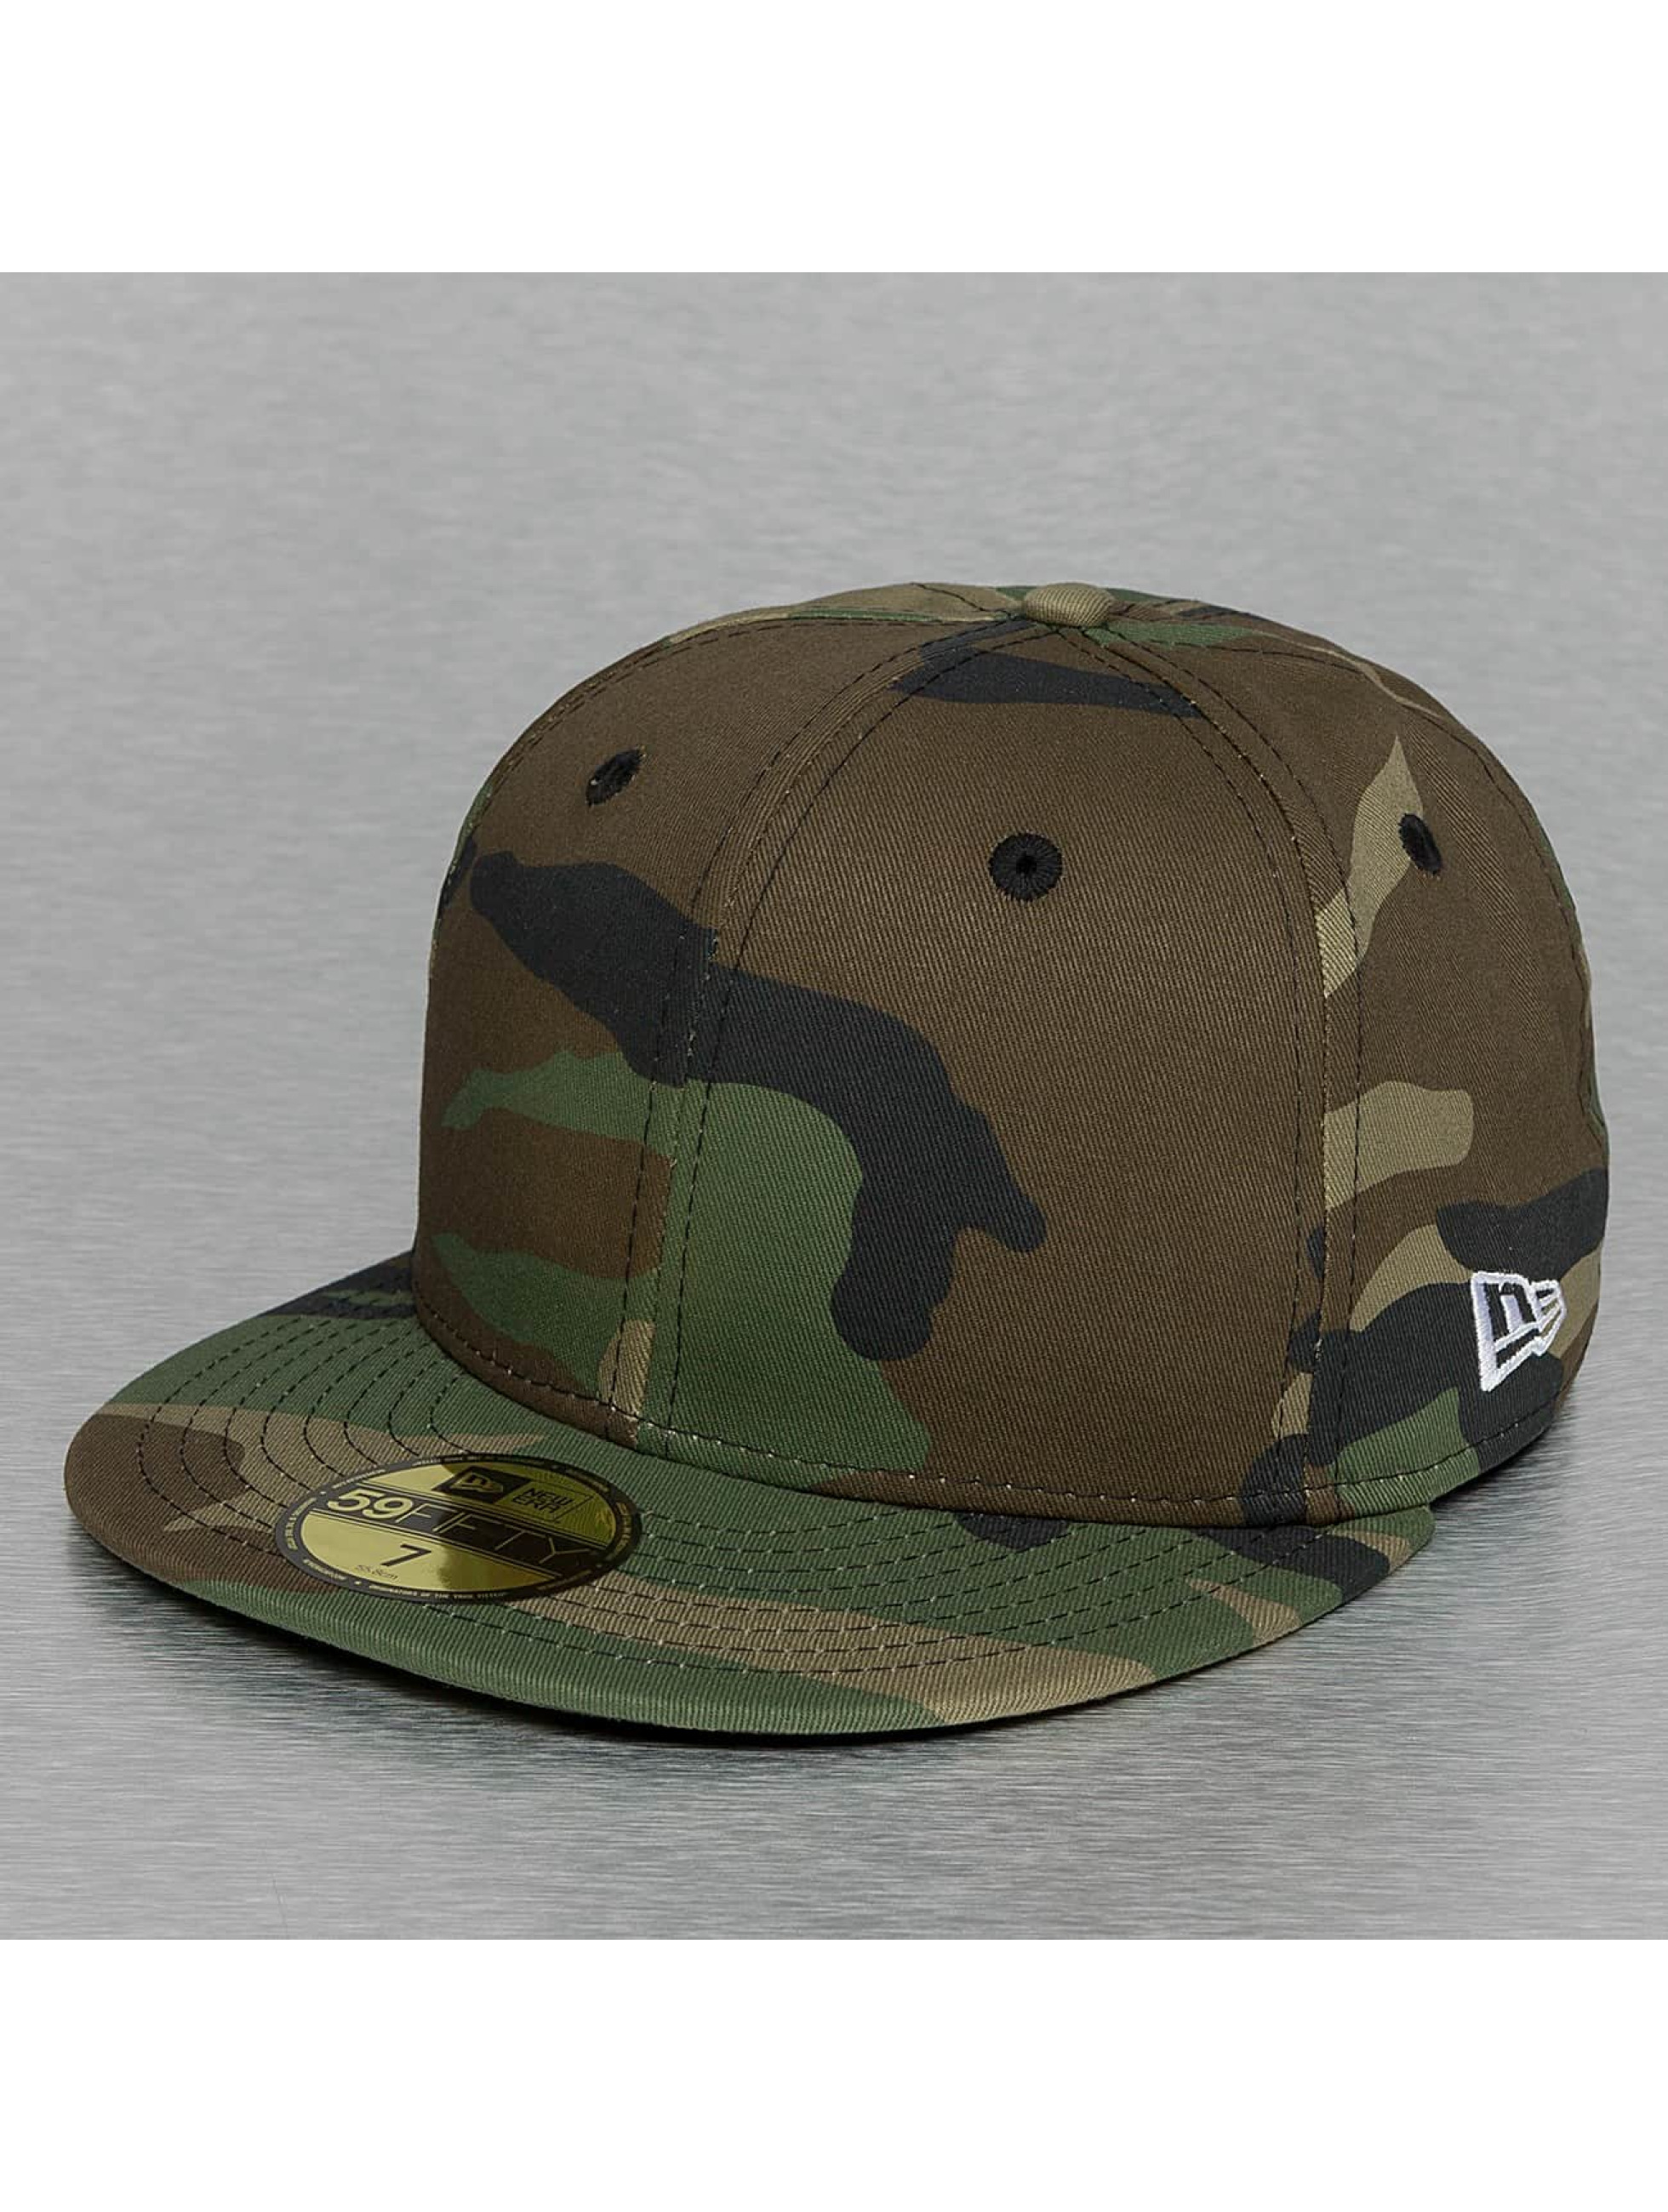 New Era Casquette / Fitted Flag Essential en camouflage